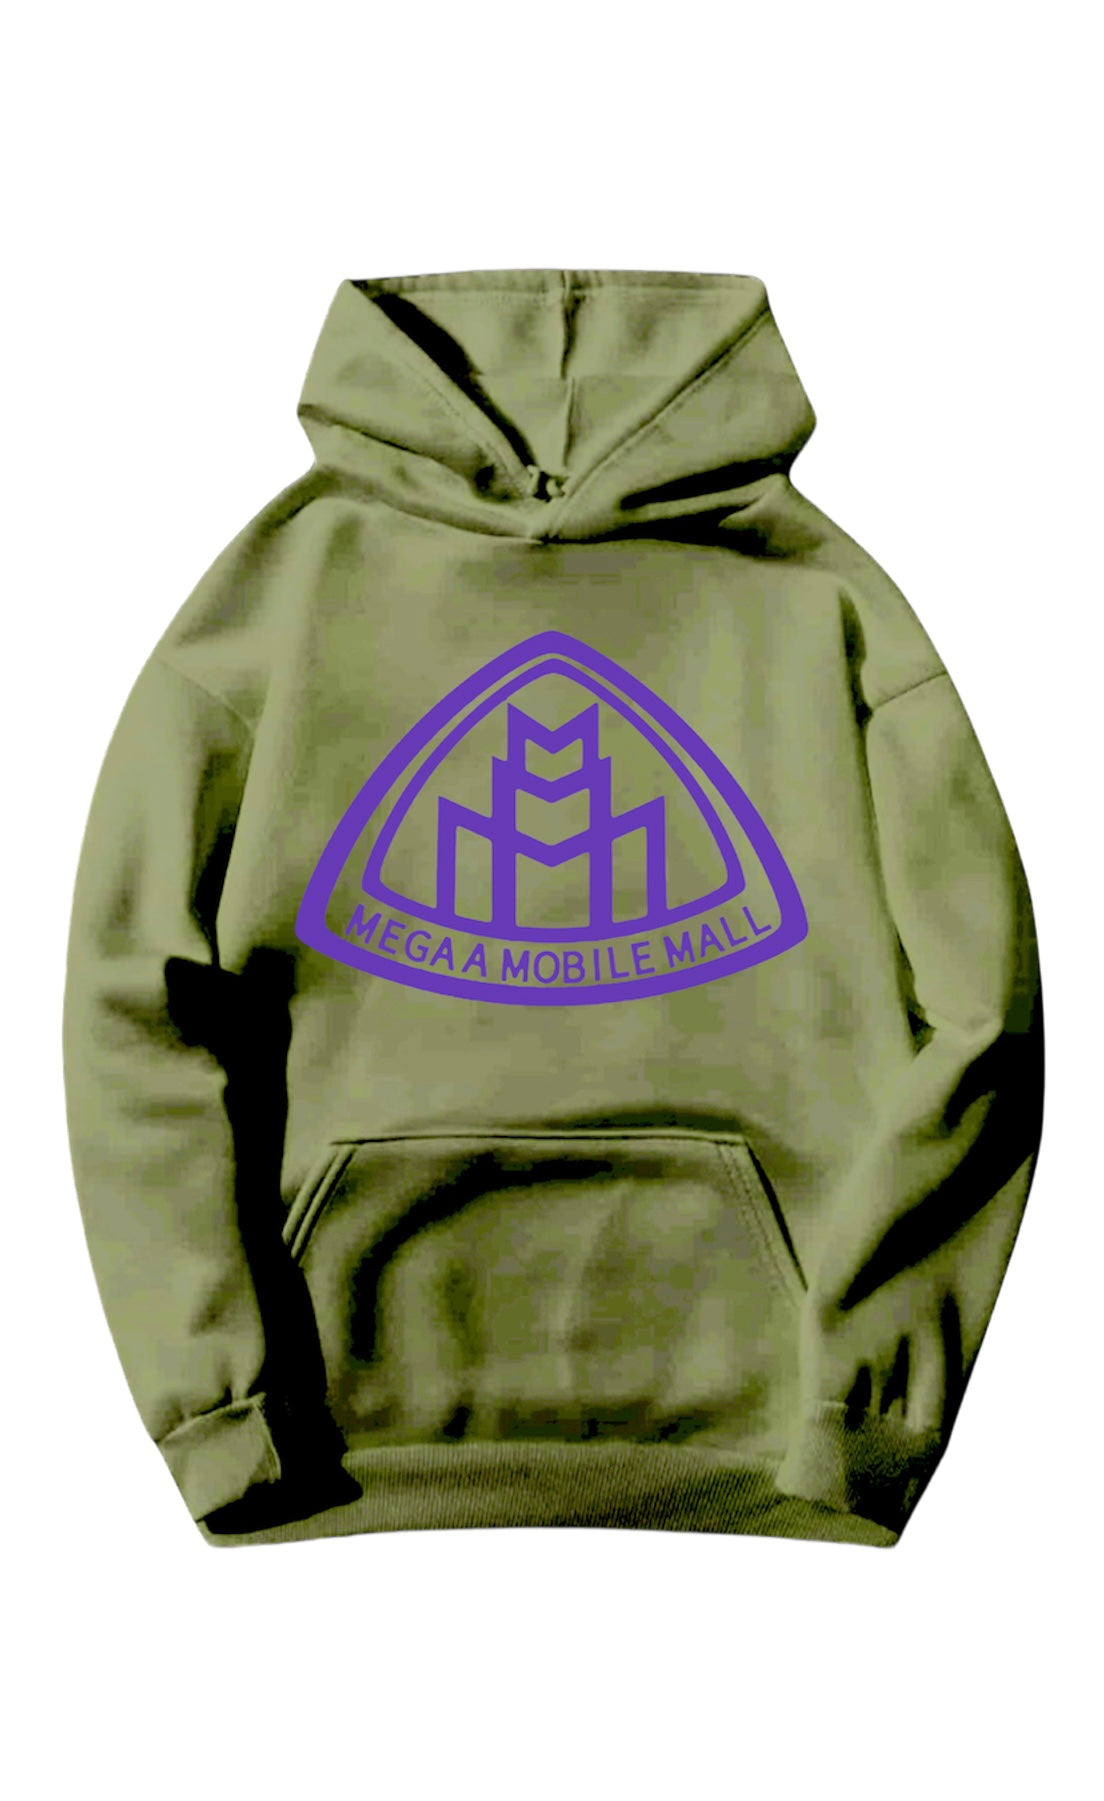 olive green megaamobilemall logo Heavy Blend Fleece Hoodie with purple logo